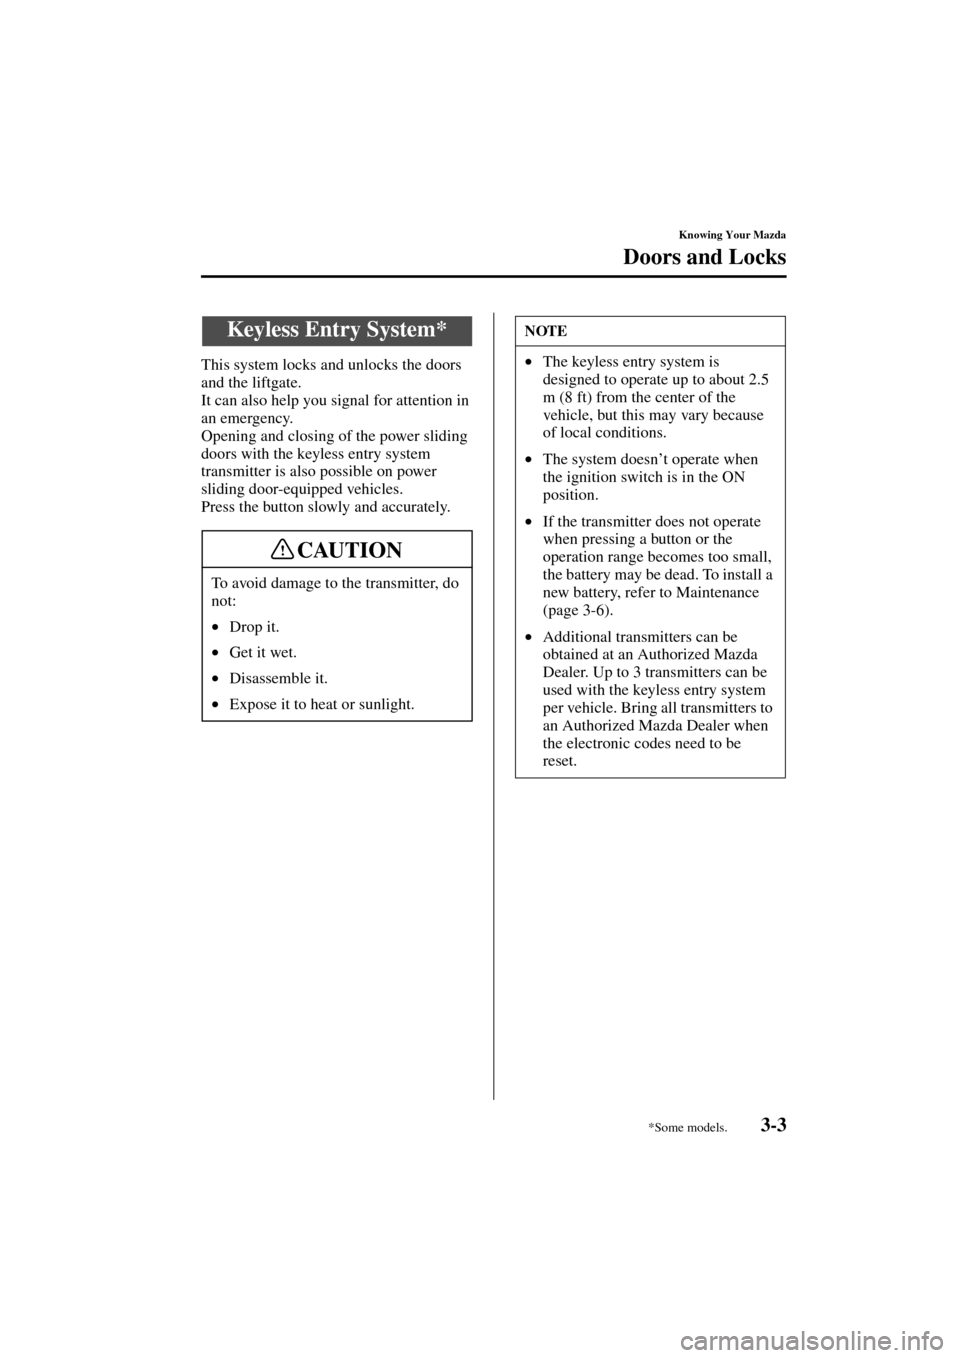 MAZDA MODEL MPV 2004  Owners Manual (in English) 3-3
Knowing Your Mazda
Doors and Locks
Form No. 8S06-EA-03H
This system locks and unlocks the doors 
and the liftgate.
It can also help you signal for attention in 
an emergency.
Opening and closing o